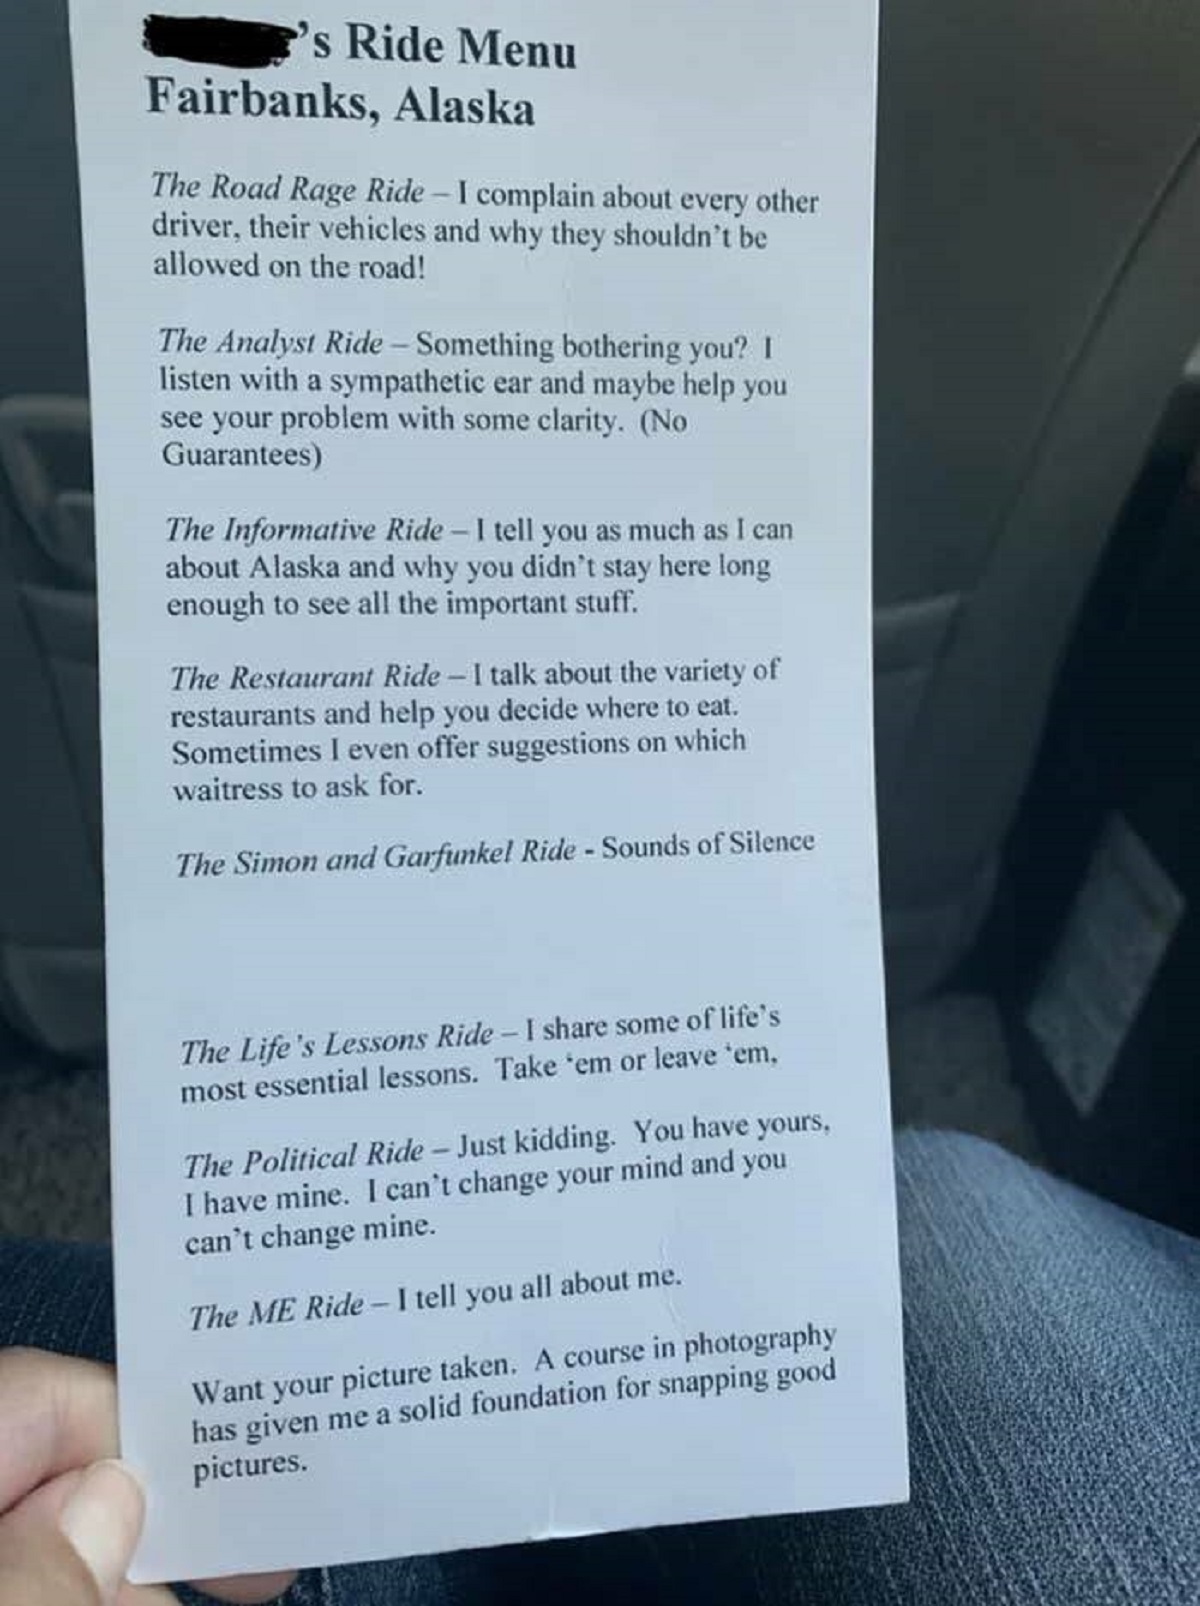 uber driver ride menu - 's Ride Menu Fairbanks, Alaska The Road Rage Ride I complain about every other driver, their vehicles and why they shouldn't be allowed on the road! The Analyst Ride Something bothering you? I listen with a sympathetic ear and mayb